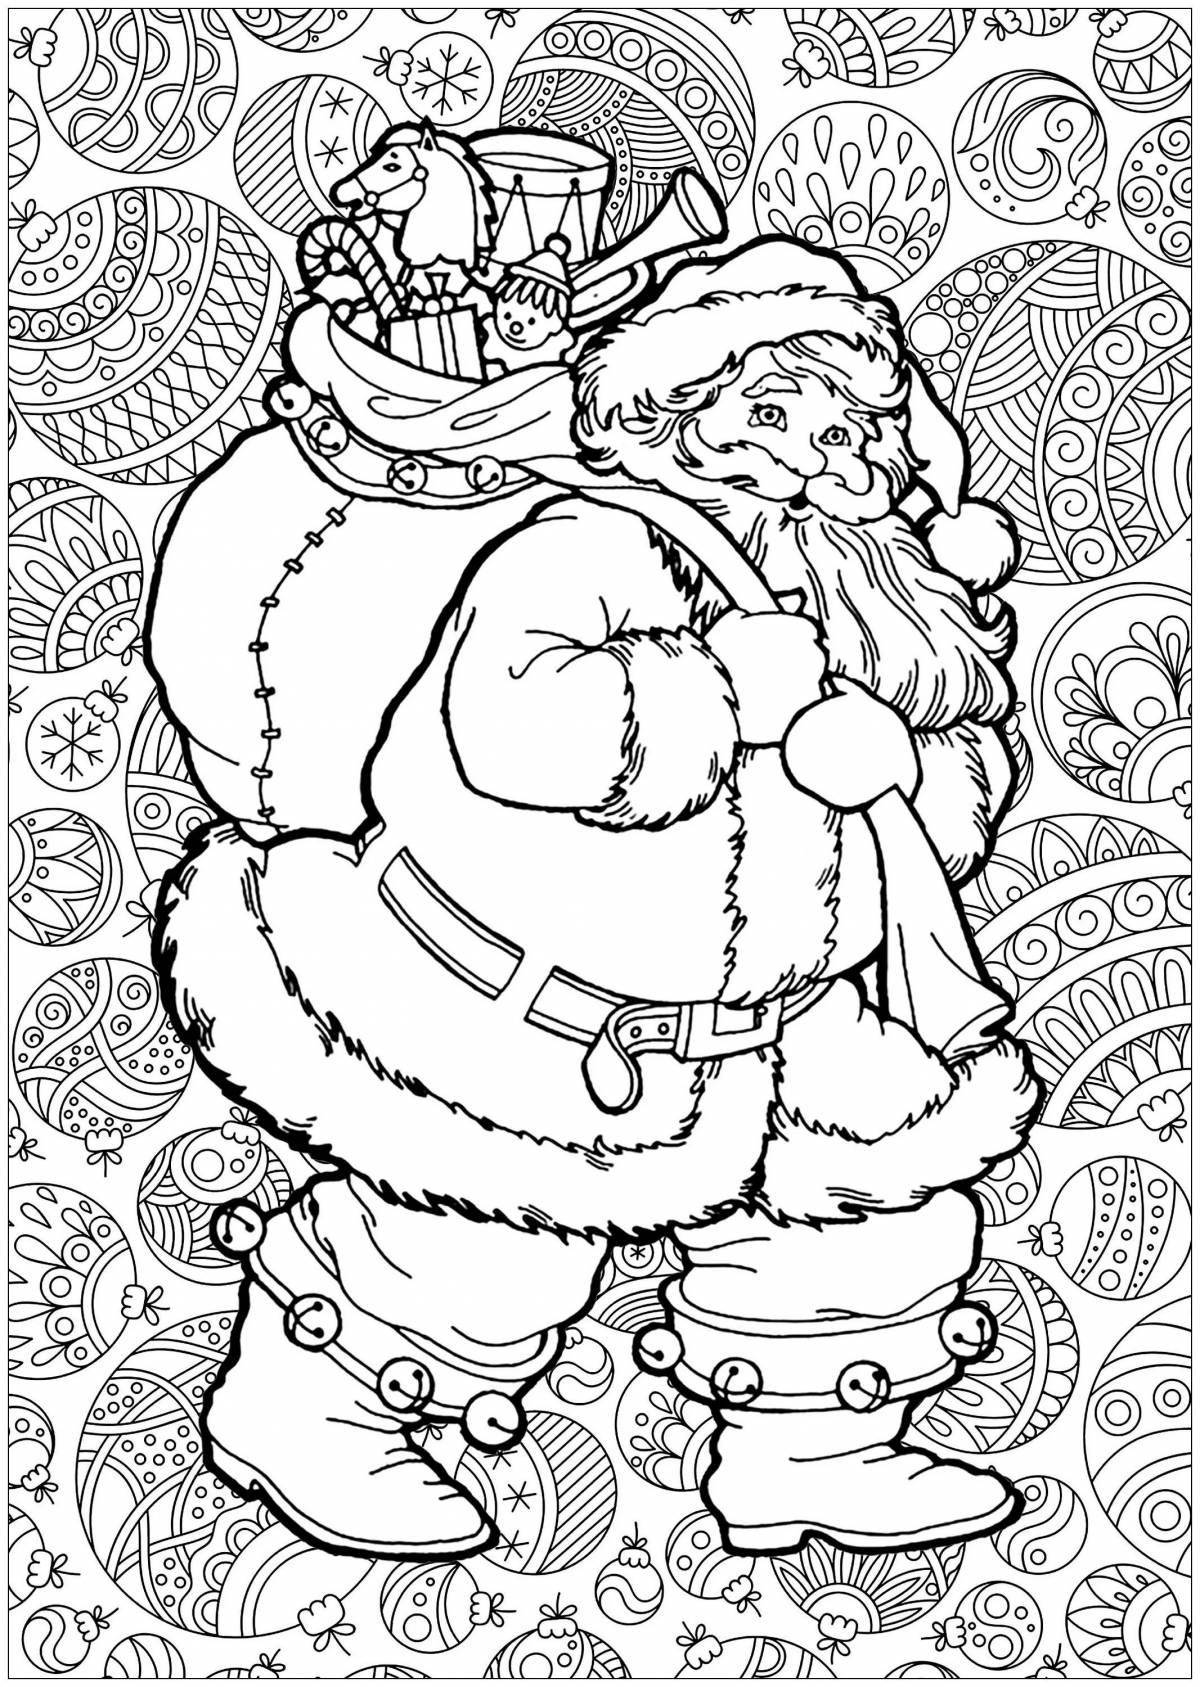 Coloring book cheerful santa claus for kids